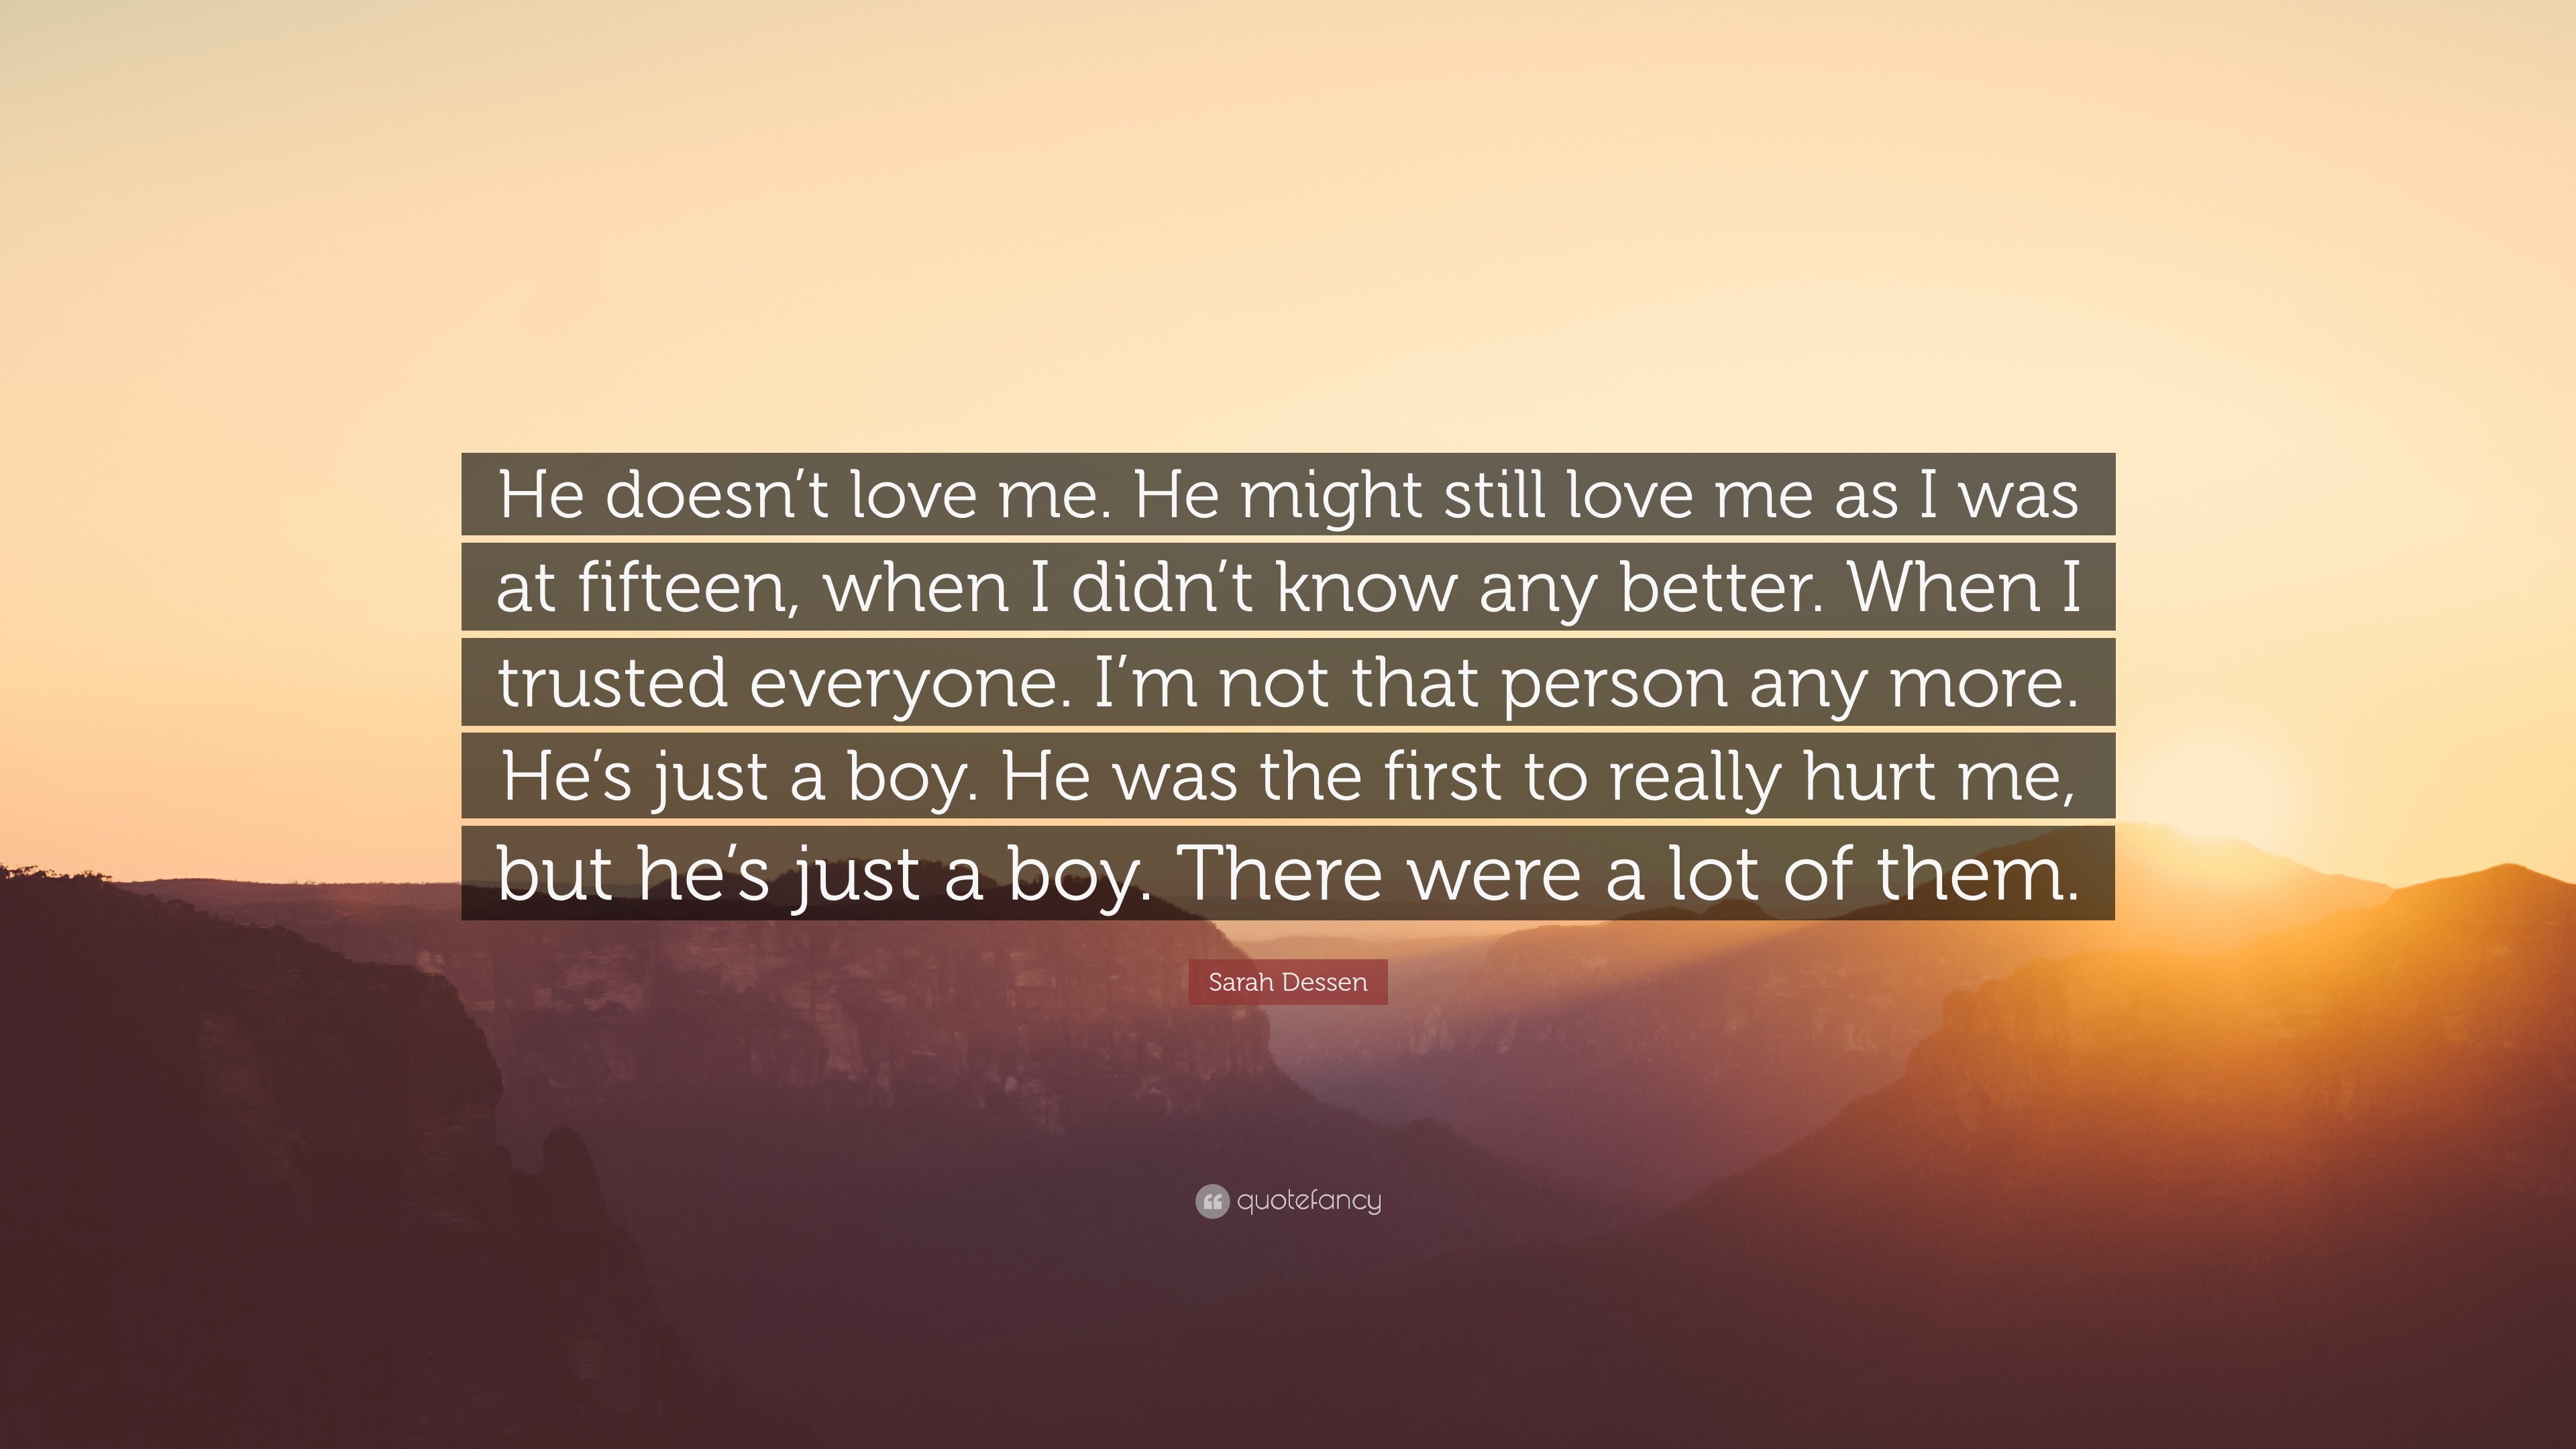 Sarah Dessen Quote “He doesn t love me He might still love